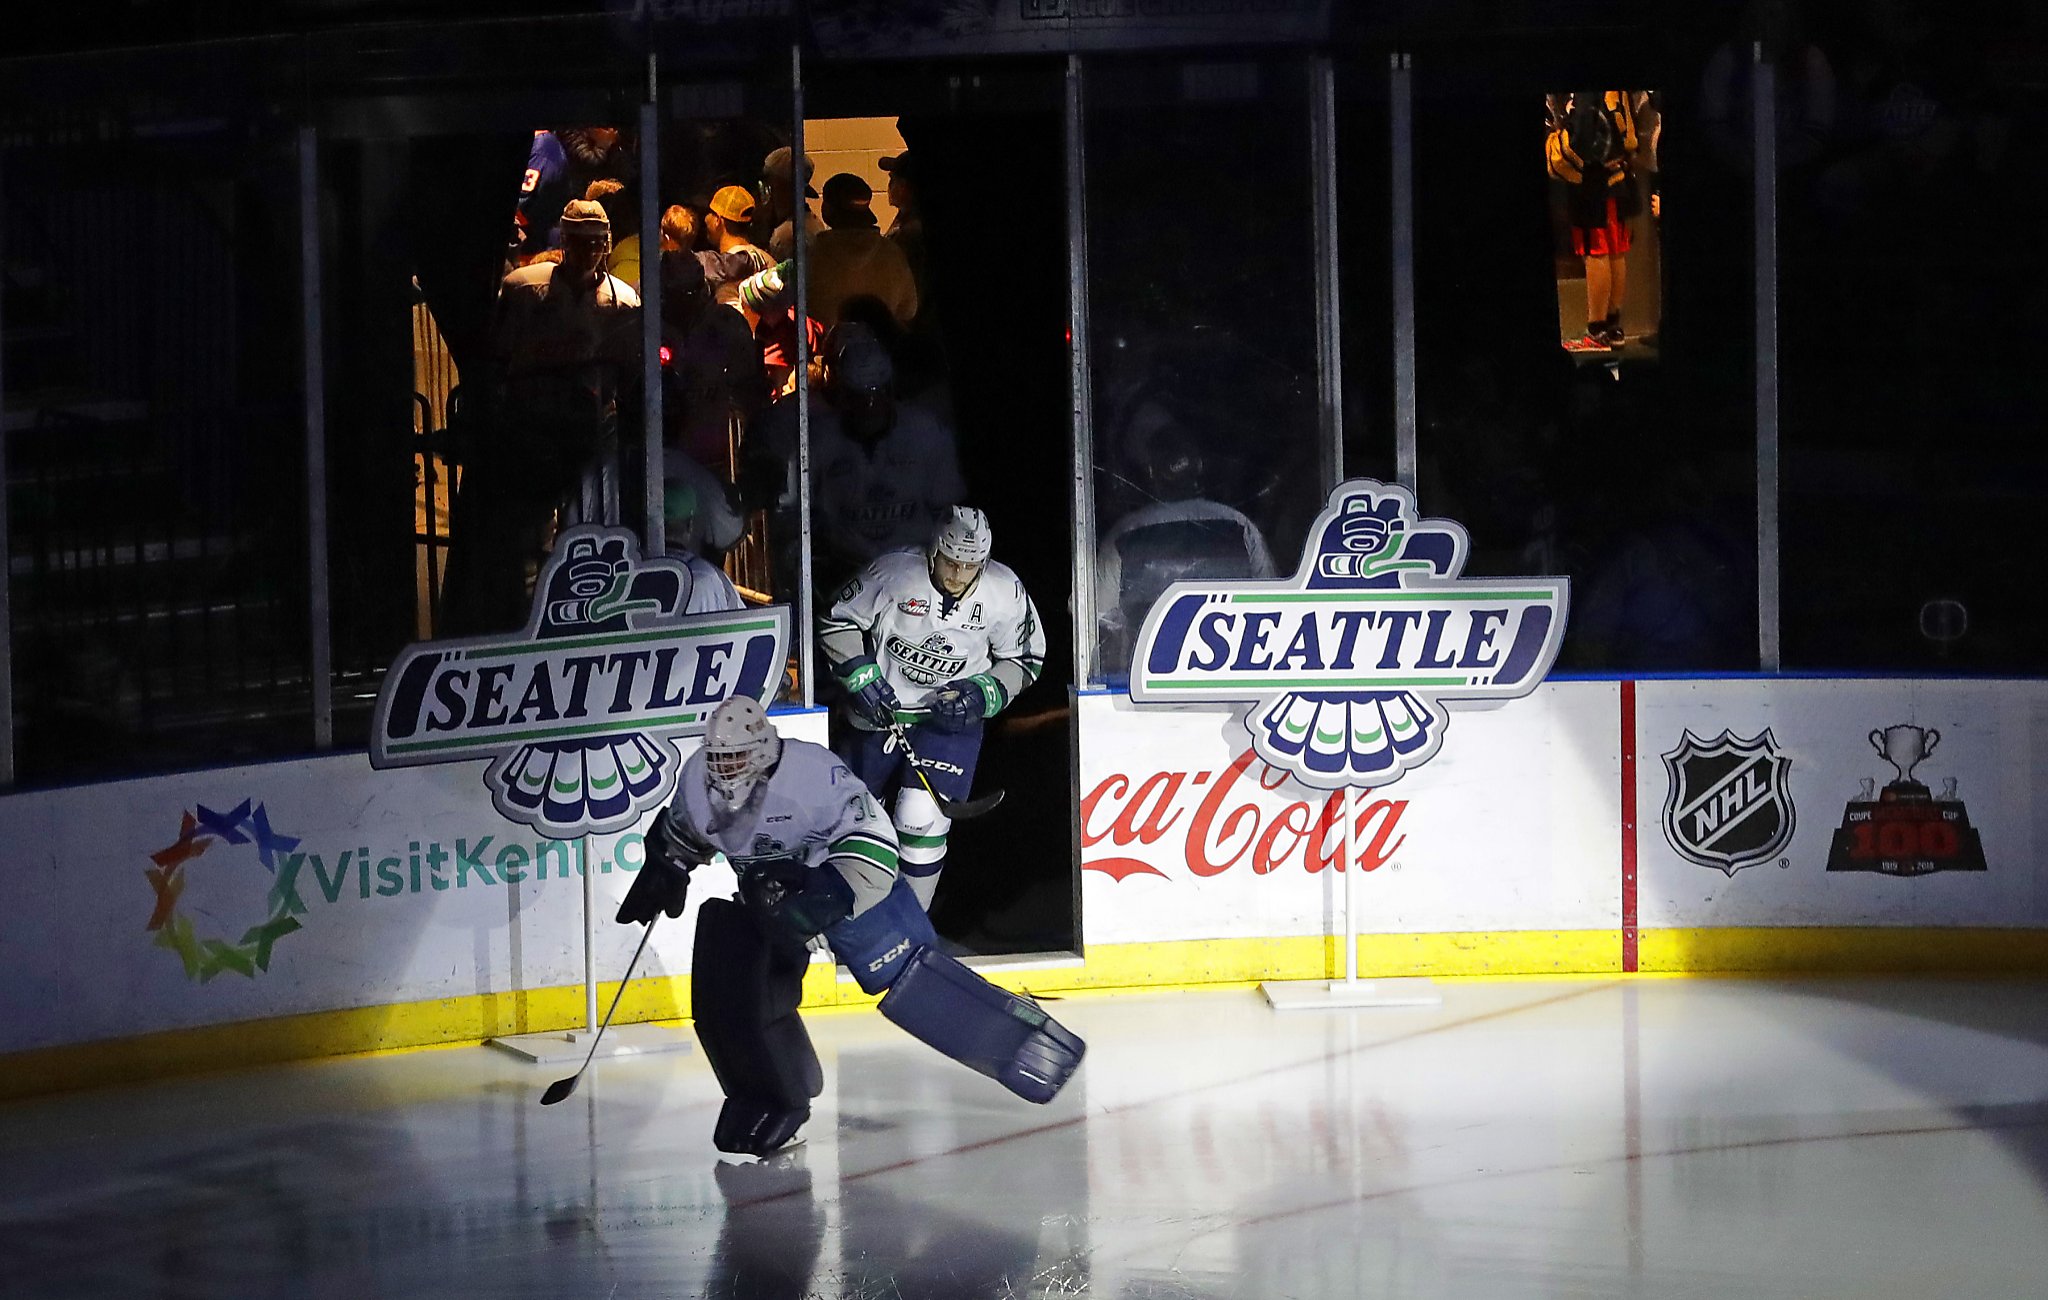 Seattle Concept - High on Hockey